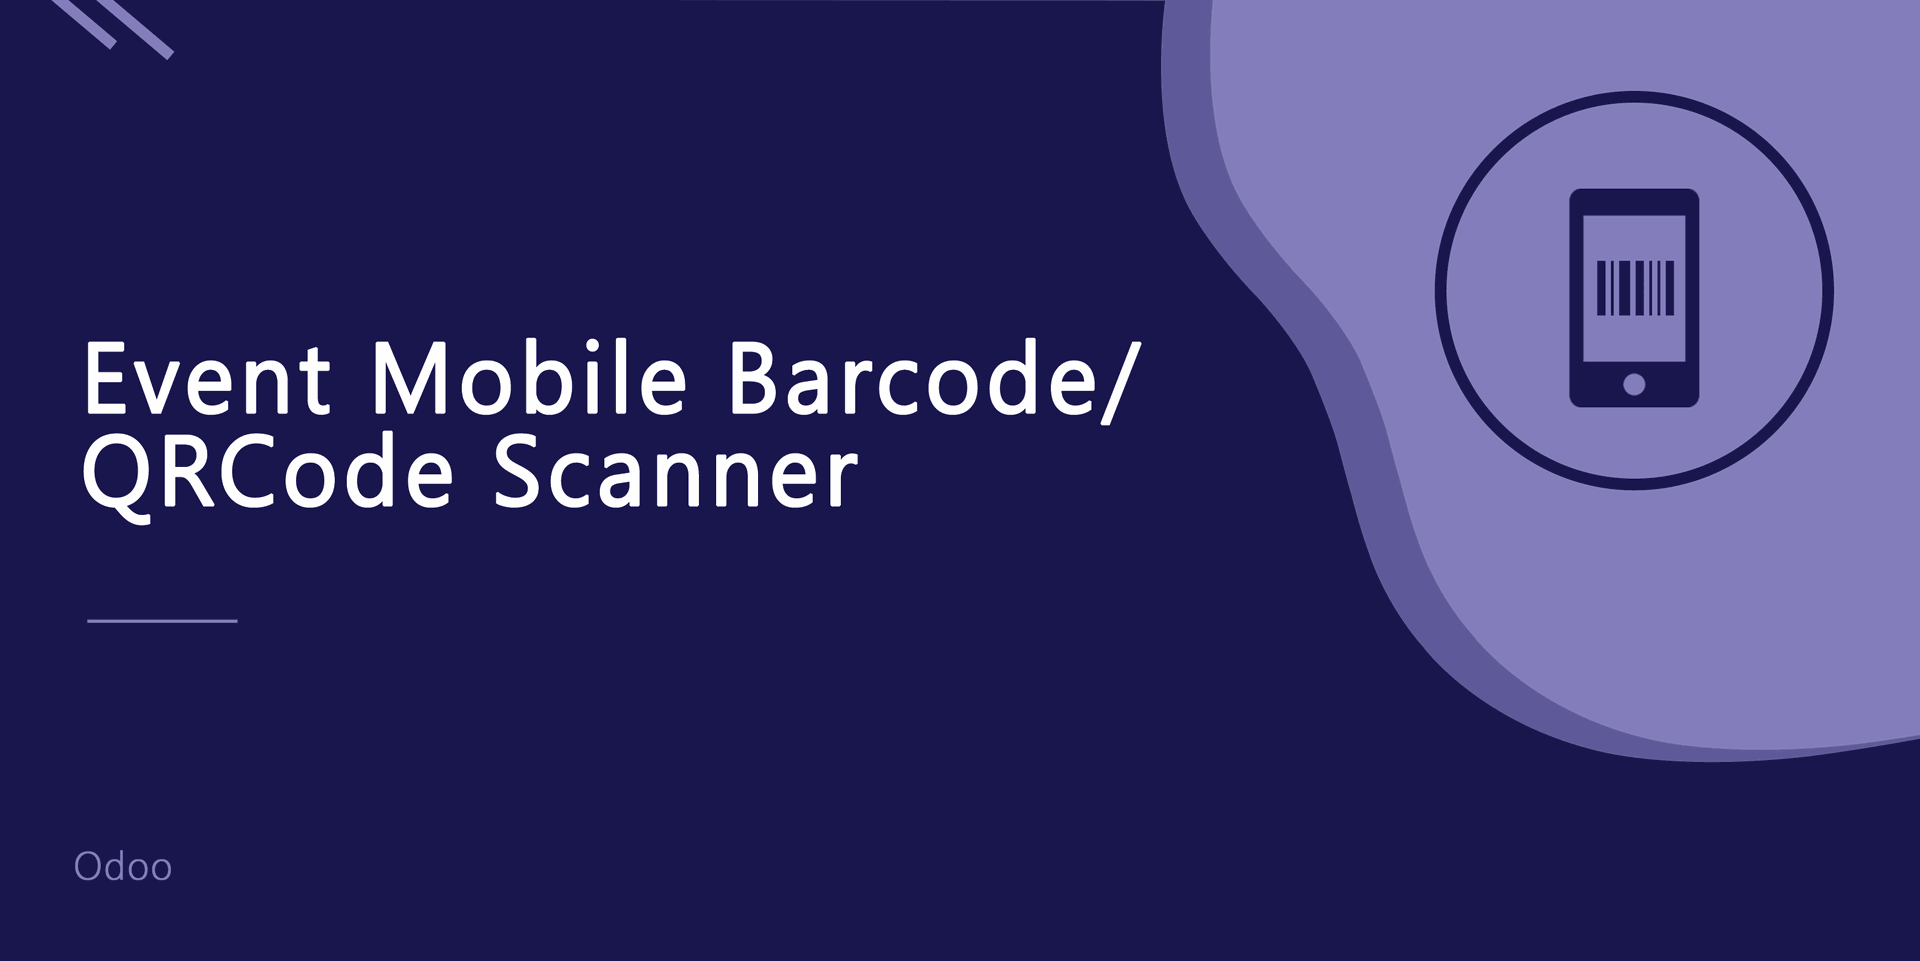 Event Mobile Barcode/QRCode Scanner
